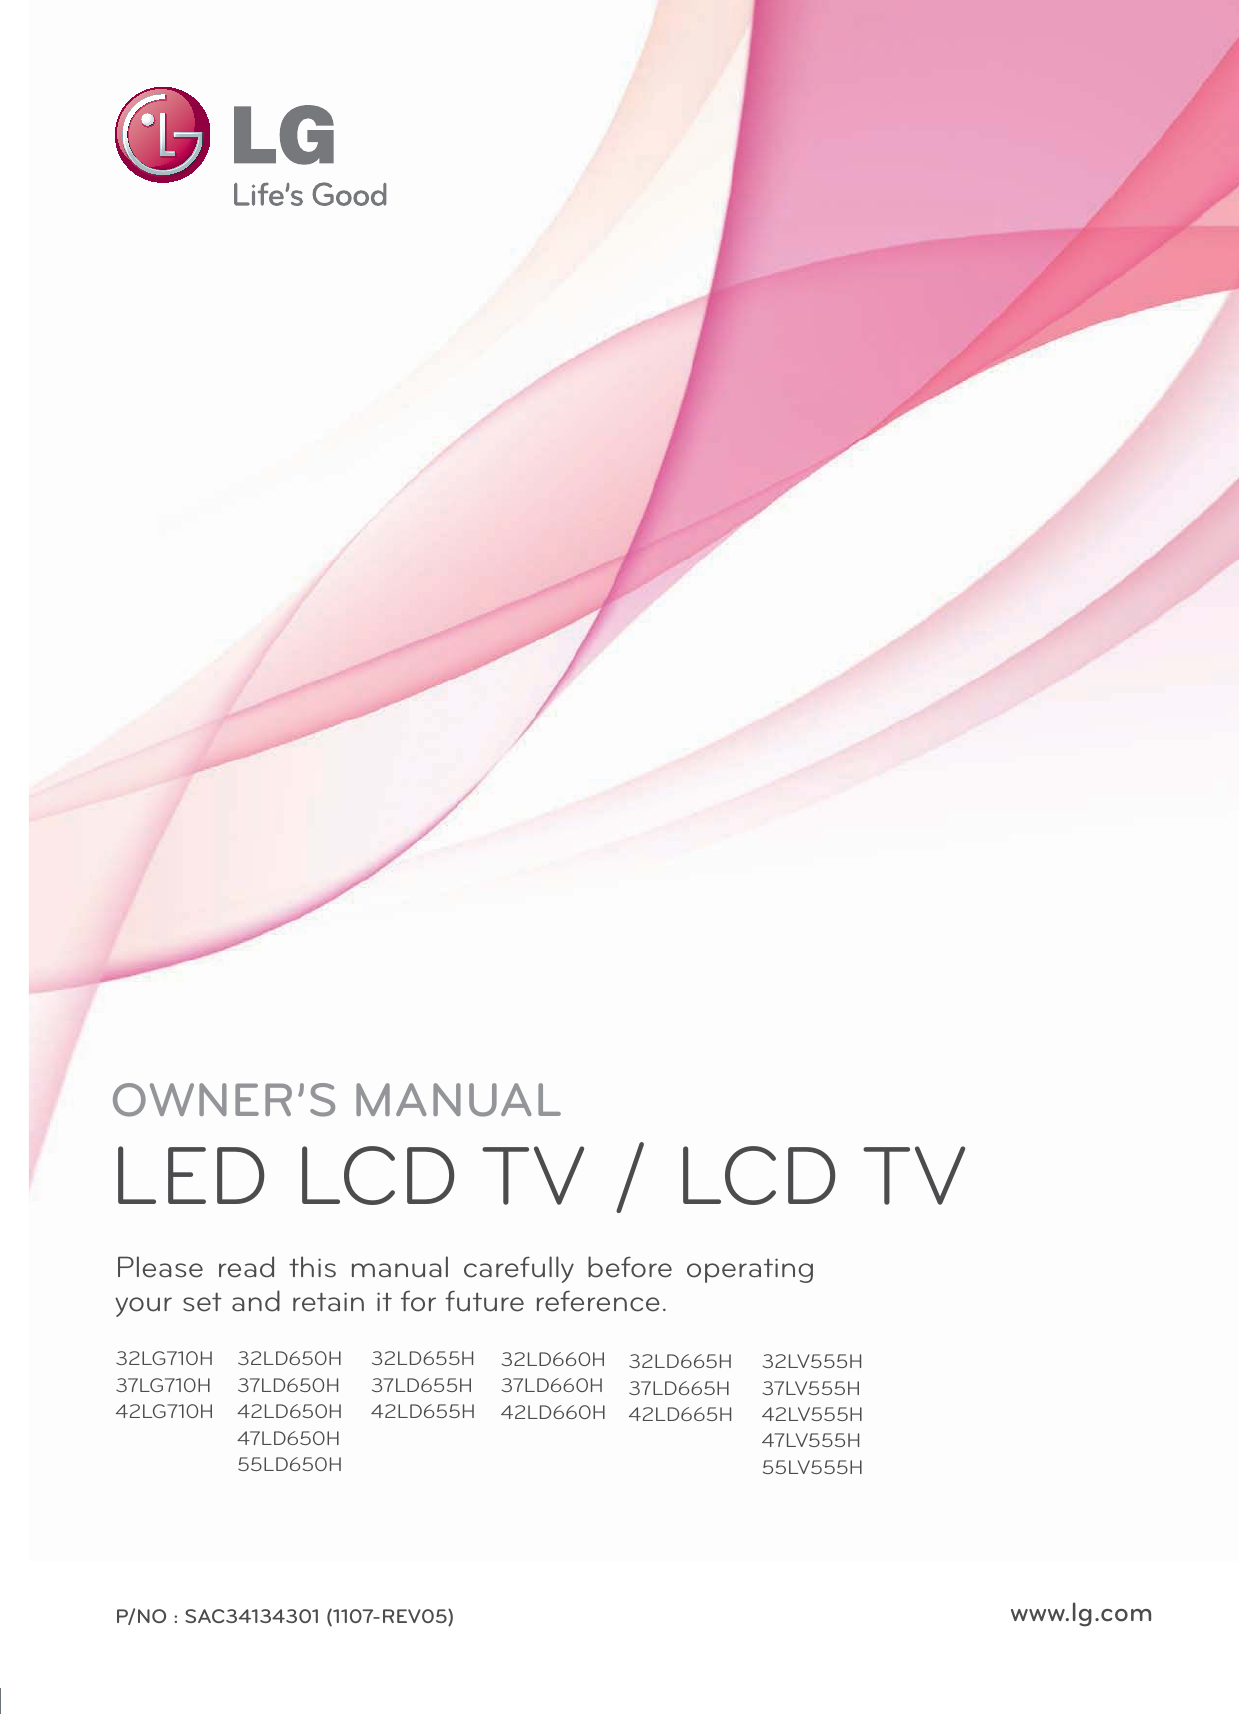 OWNER’S MANUALLED LCD TV / LCD TVPlease read this manual carefully before operating your set and retain it for future reference.P/NO : SAC34134301 (1107-REV05) www.lg.com32LG710H37LG710H42LG710H32LD650H37LD650H42LD650H47LD650H55LD650H32LD655H37LD655H42LD655H32LD660H37LD660H42LD660H32LD665H37LD665H42LD665H32LV555H37LV555H42LV555H47LV555H55LV555H